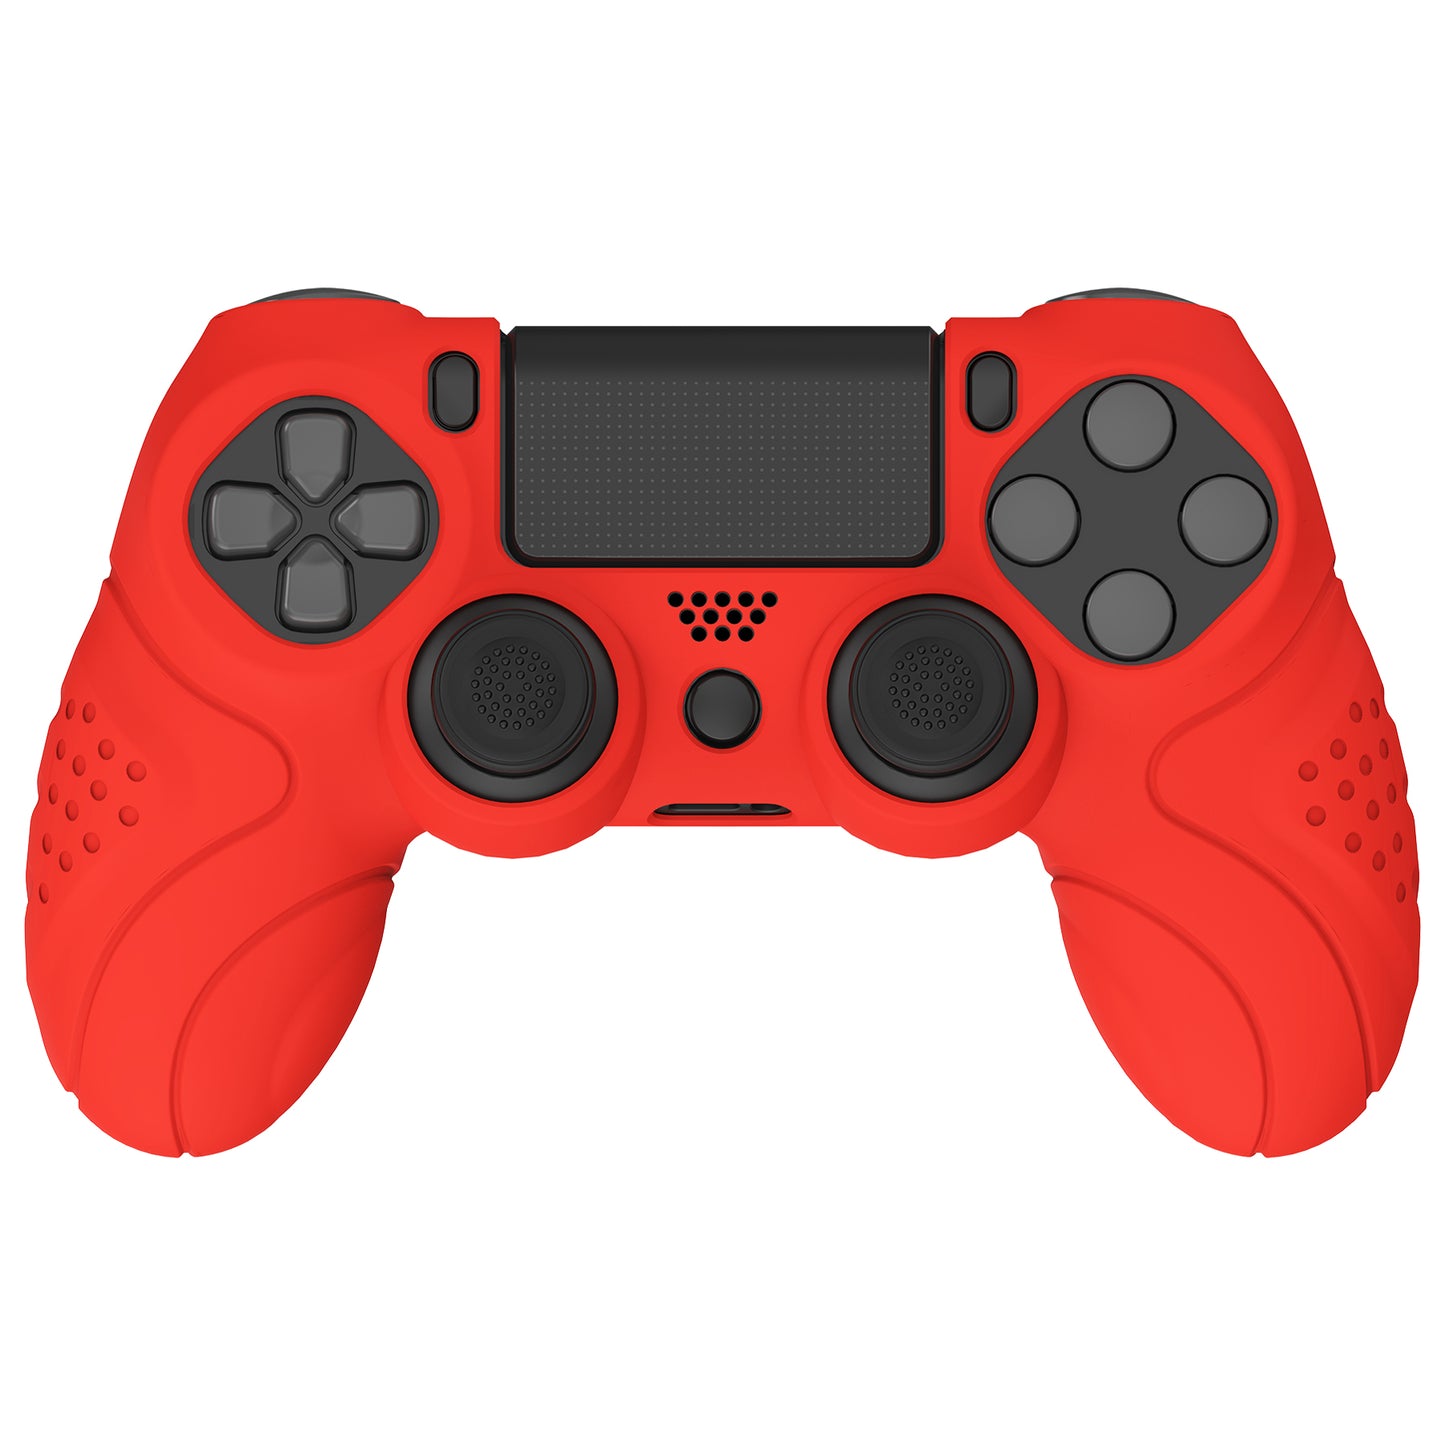 PlayVital Guardian Edition Passion Red Ergonomic Soft Anti-Slip Controller Silicone Case Cover for PS4, Rubber Protector Skins with black Joystick Caps for PS4 Slim PS4 Pro Controller - P4CC0067 playvital